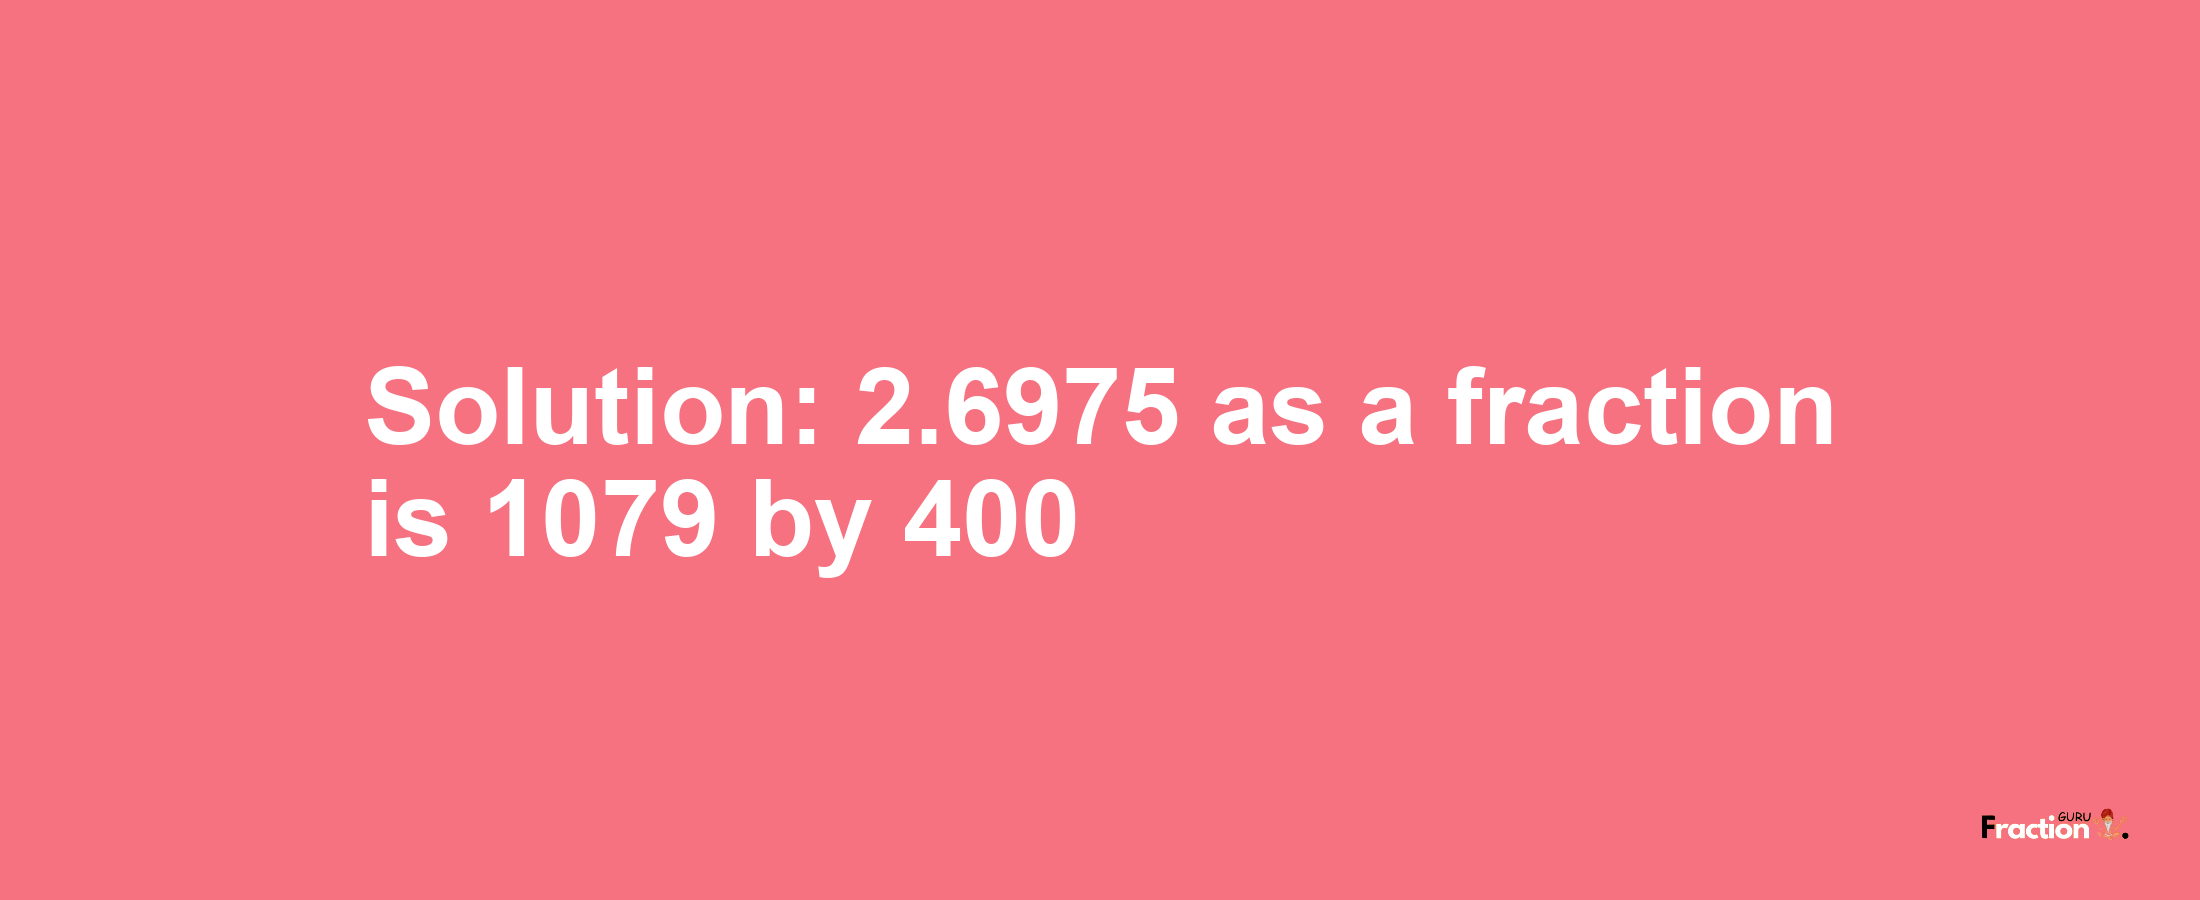 Solution:2.6975 as a fraction is 1079/400